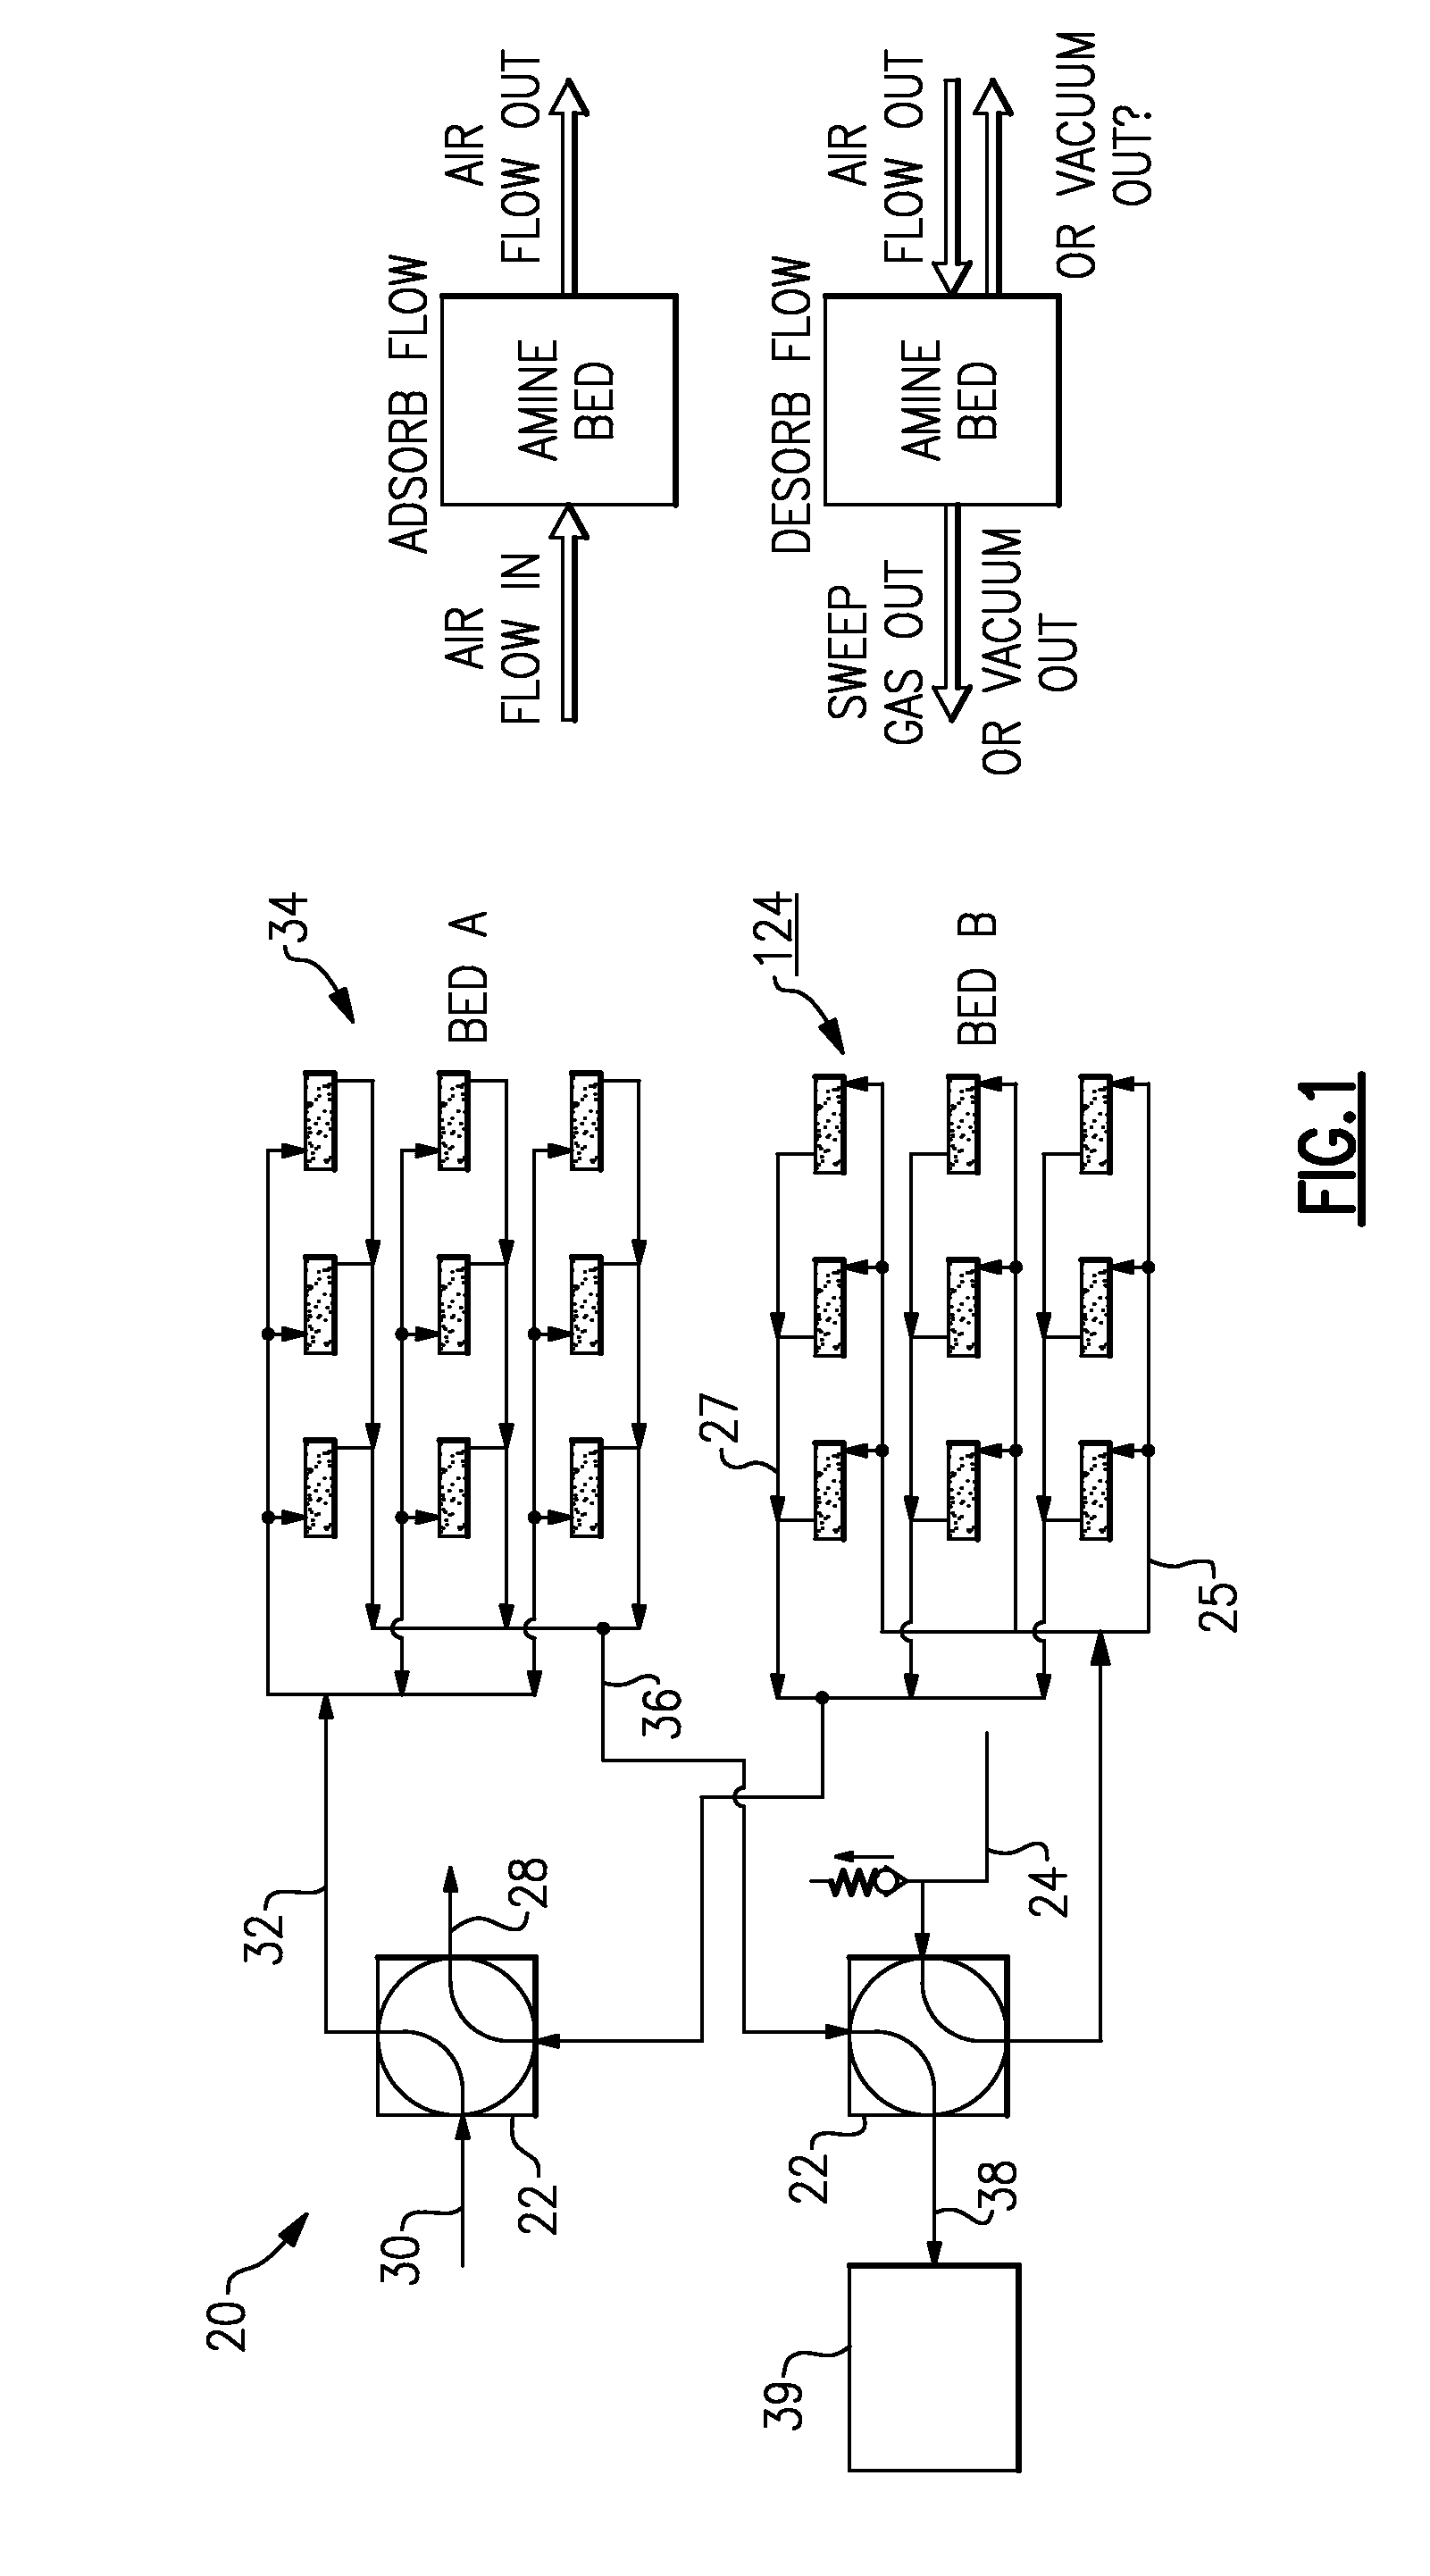 Rotary valve element for twin bed alternative treatment systems